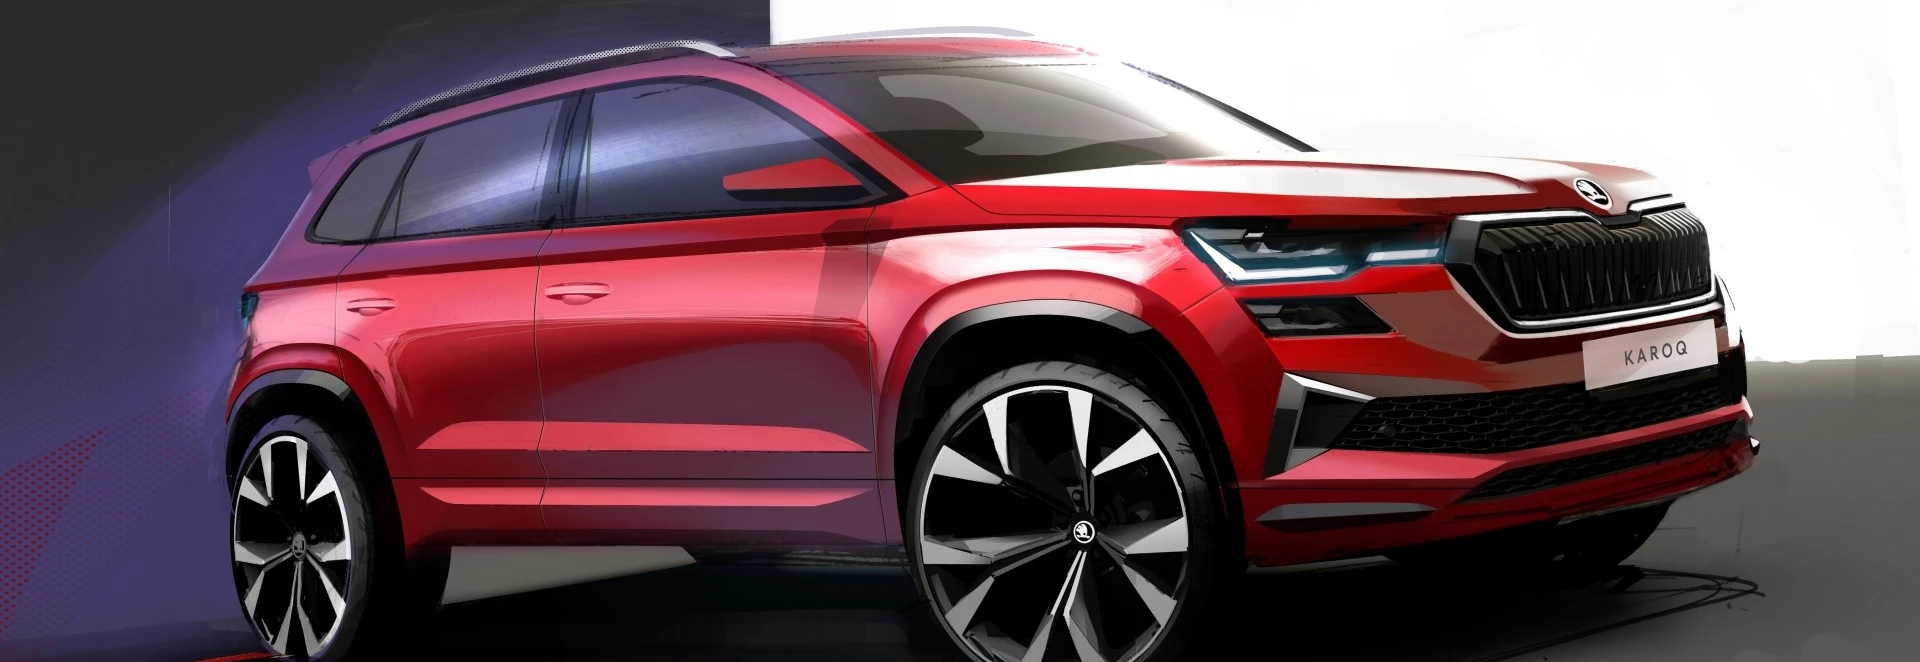 Skoda teases new Karoq crossover ahead of debut later this month 